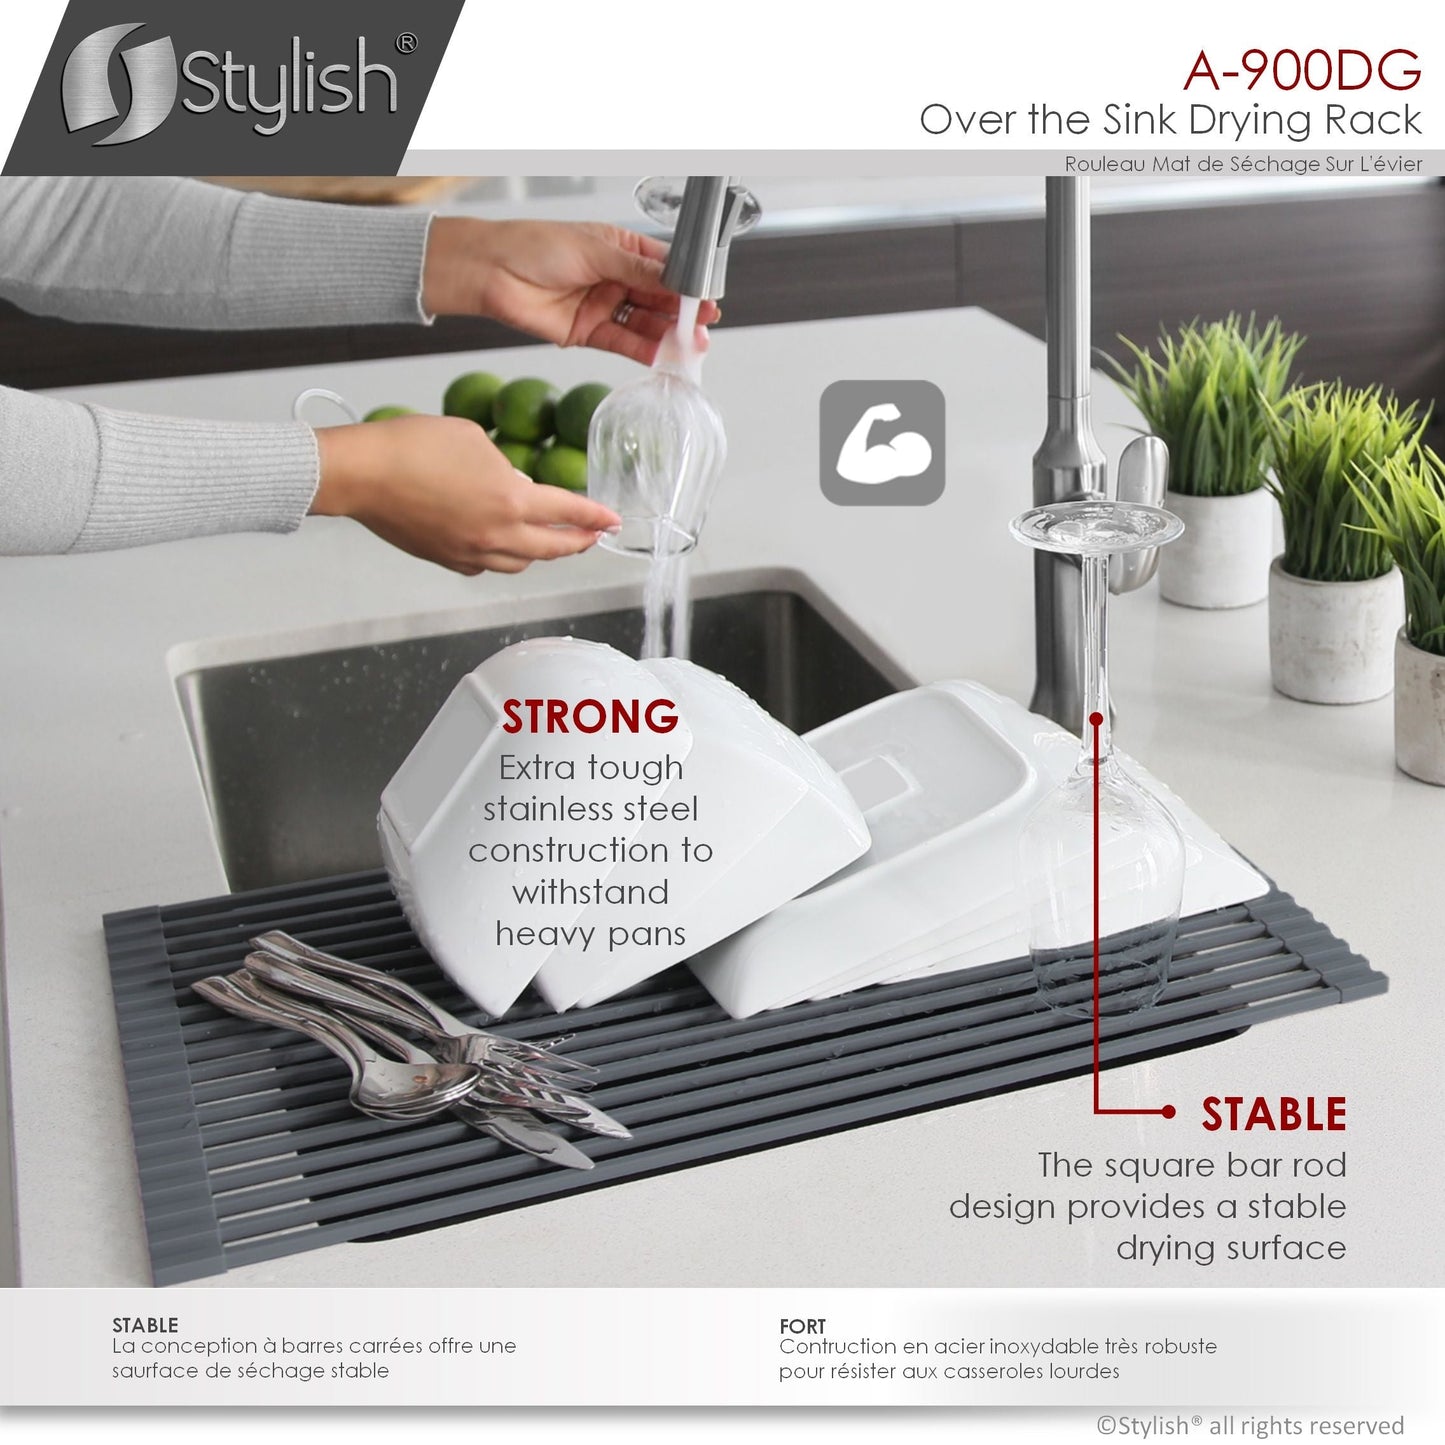 Stylish 20" Over the Sink Roll-up Drying Rack Dark Gray A-900DG